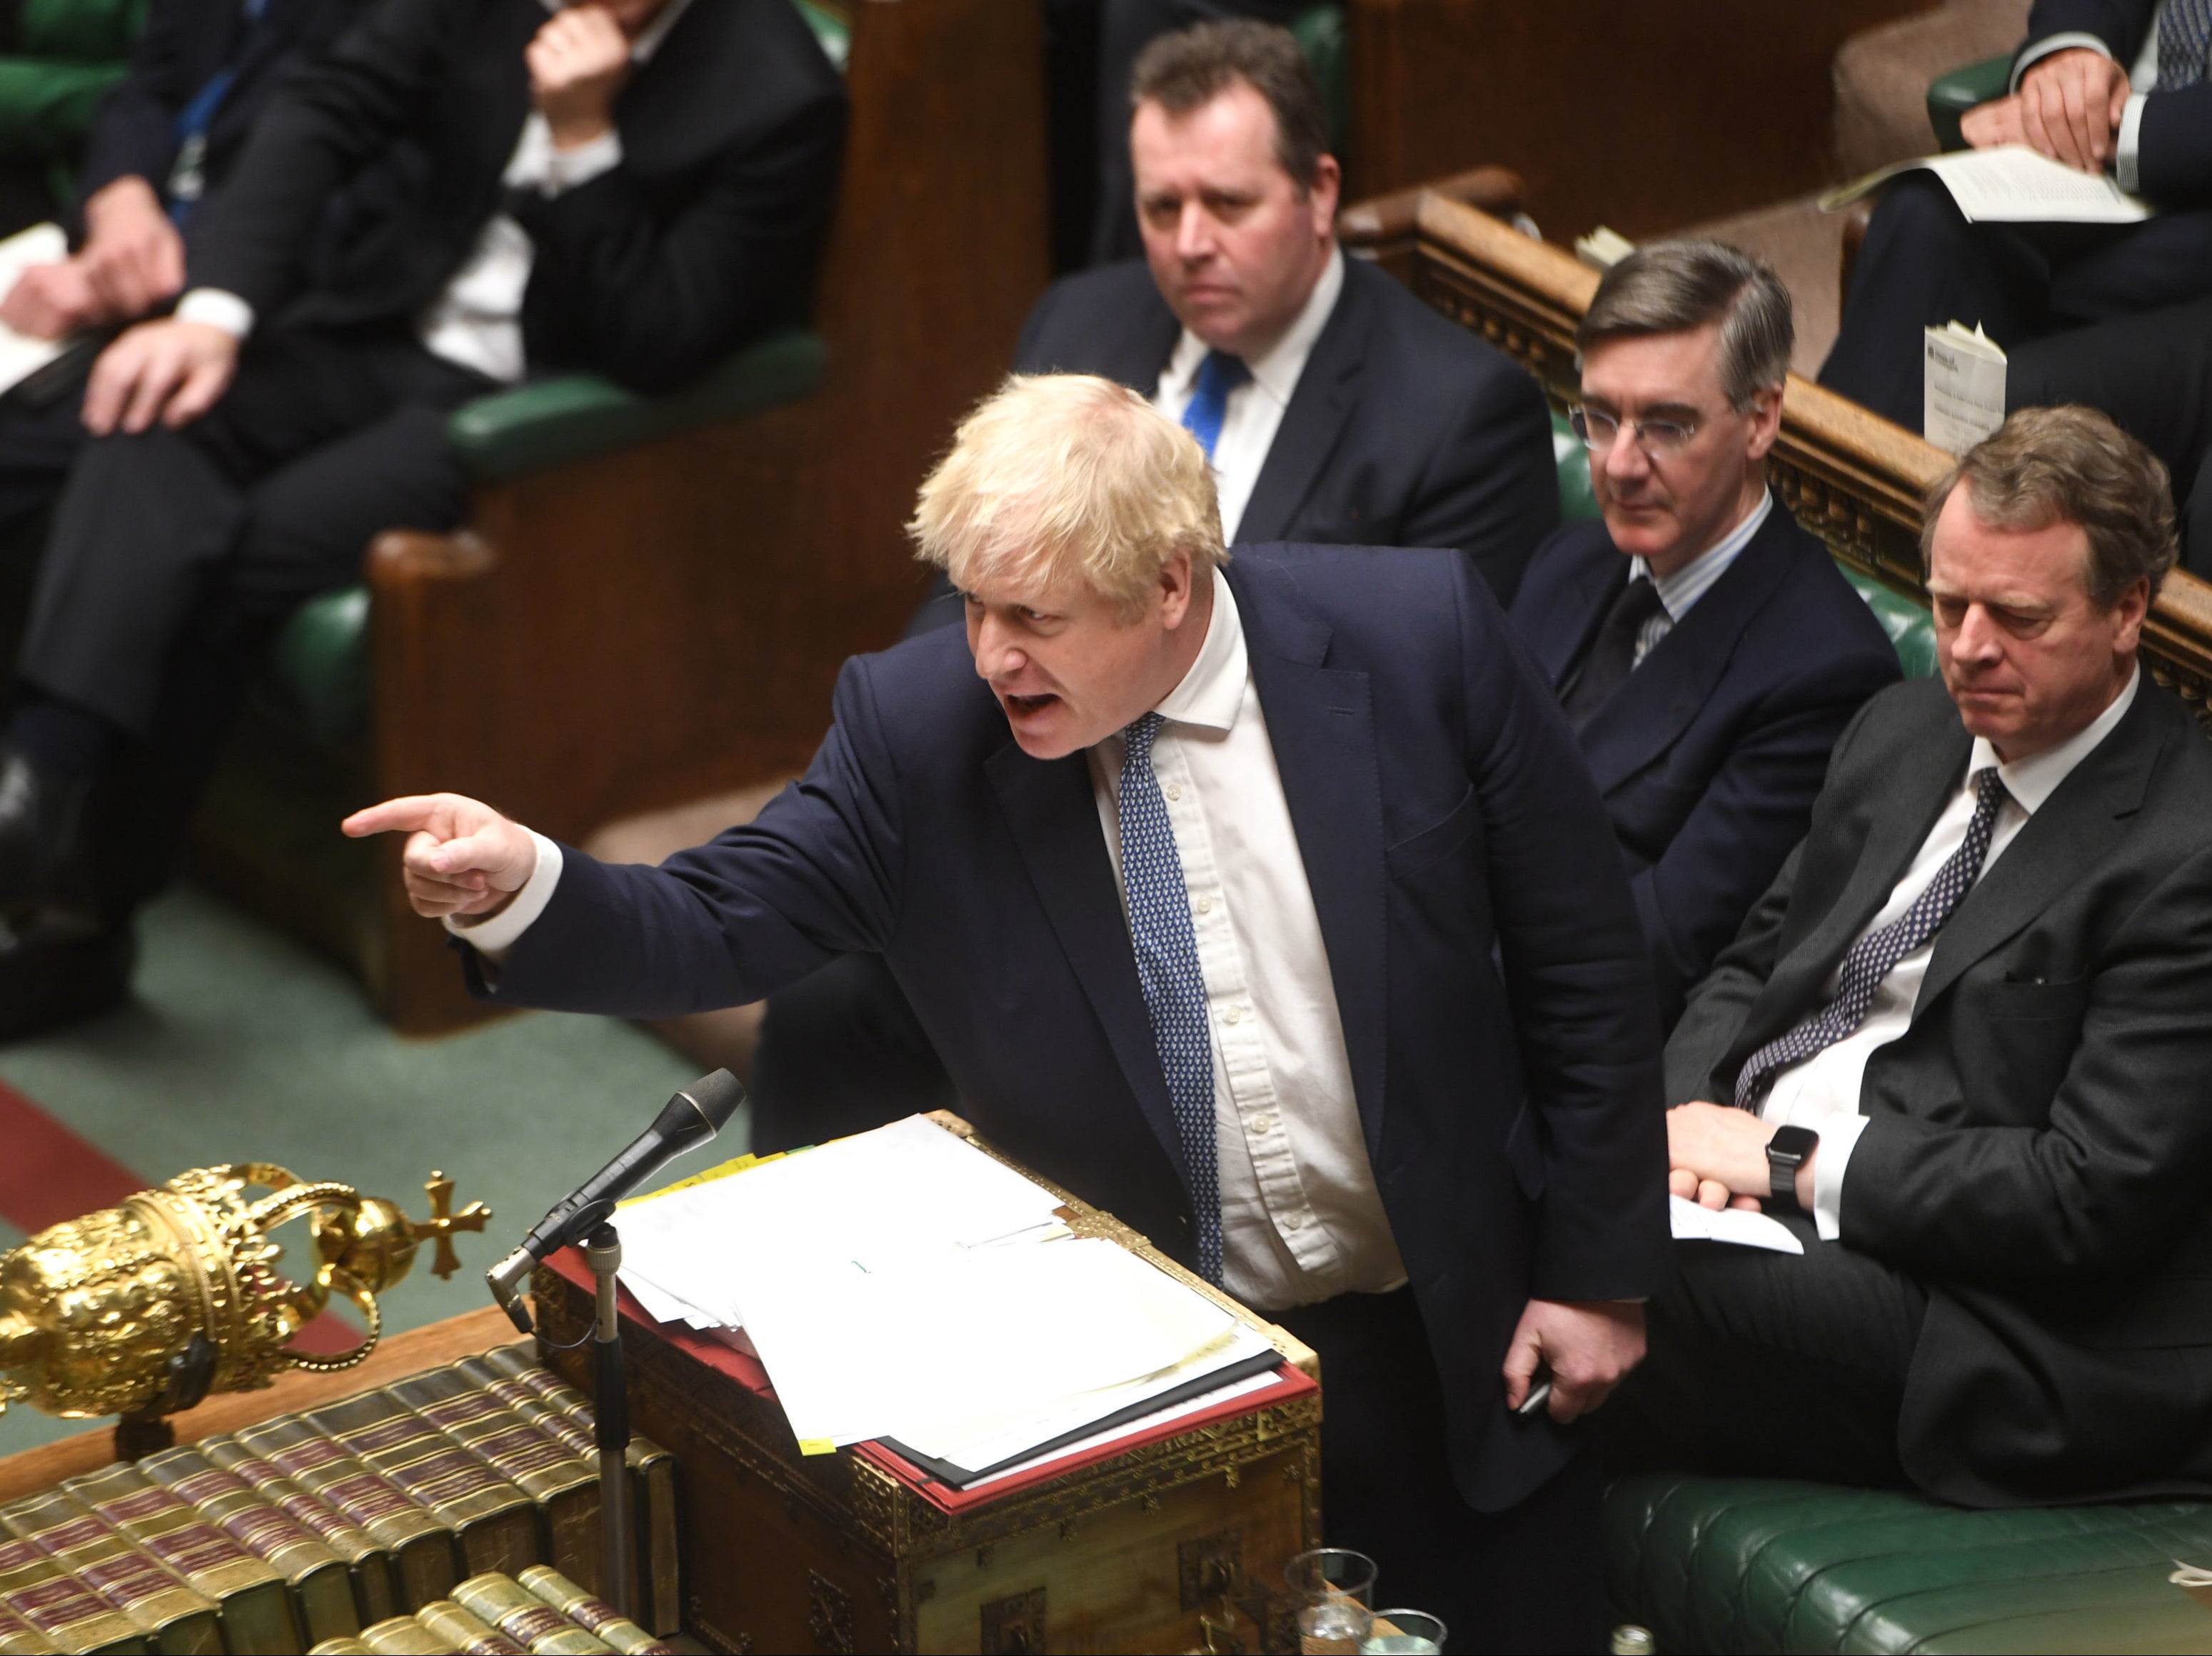 Johnson is now engaged in a dangerous and distracting war of attrition with his own backbenchers